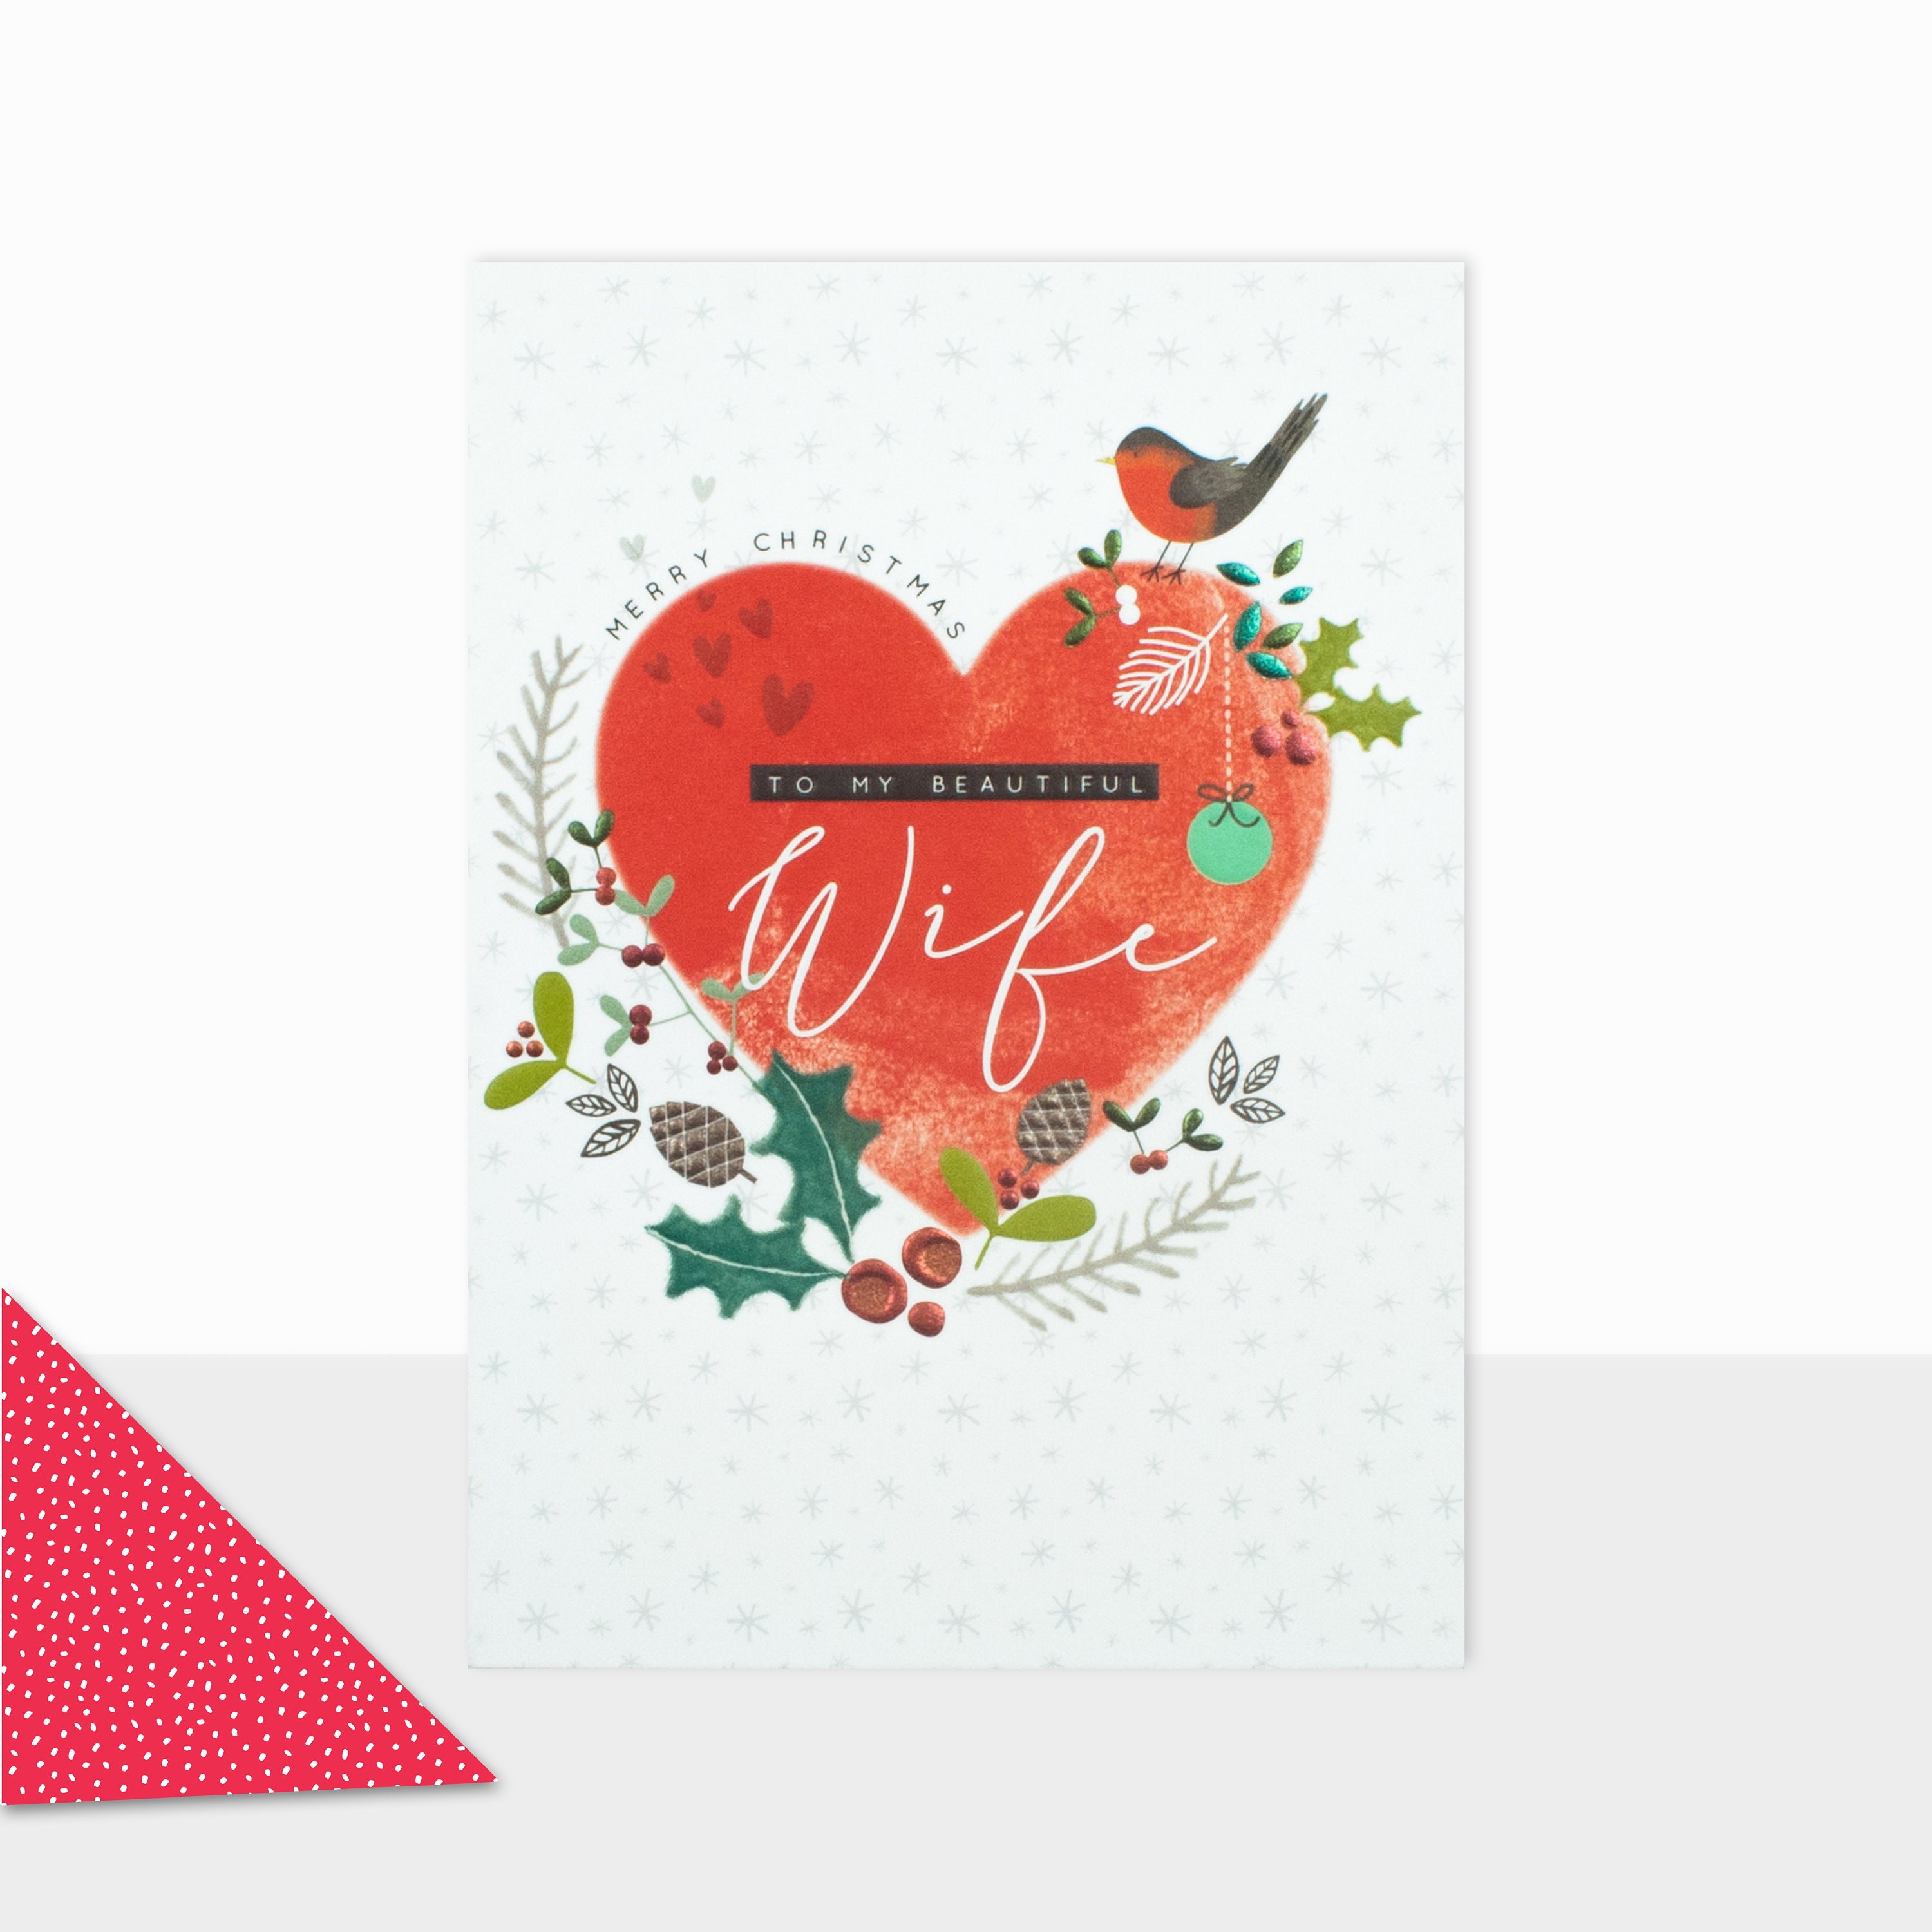 To the one i Love Greetings Card Halcyon Collection Happy Christmas Card HY121 New to Etsy